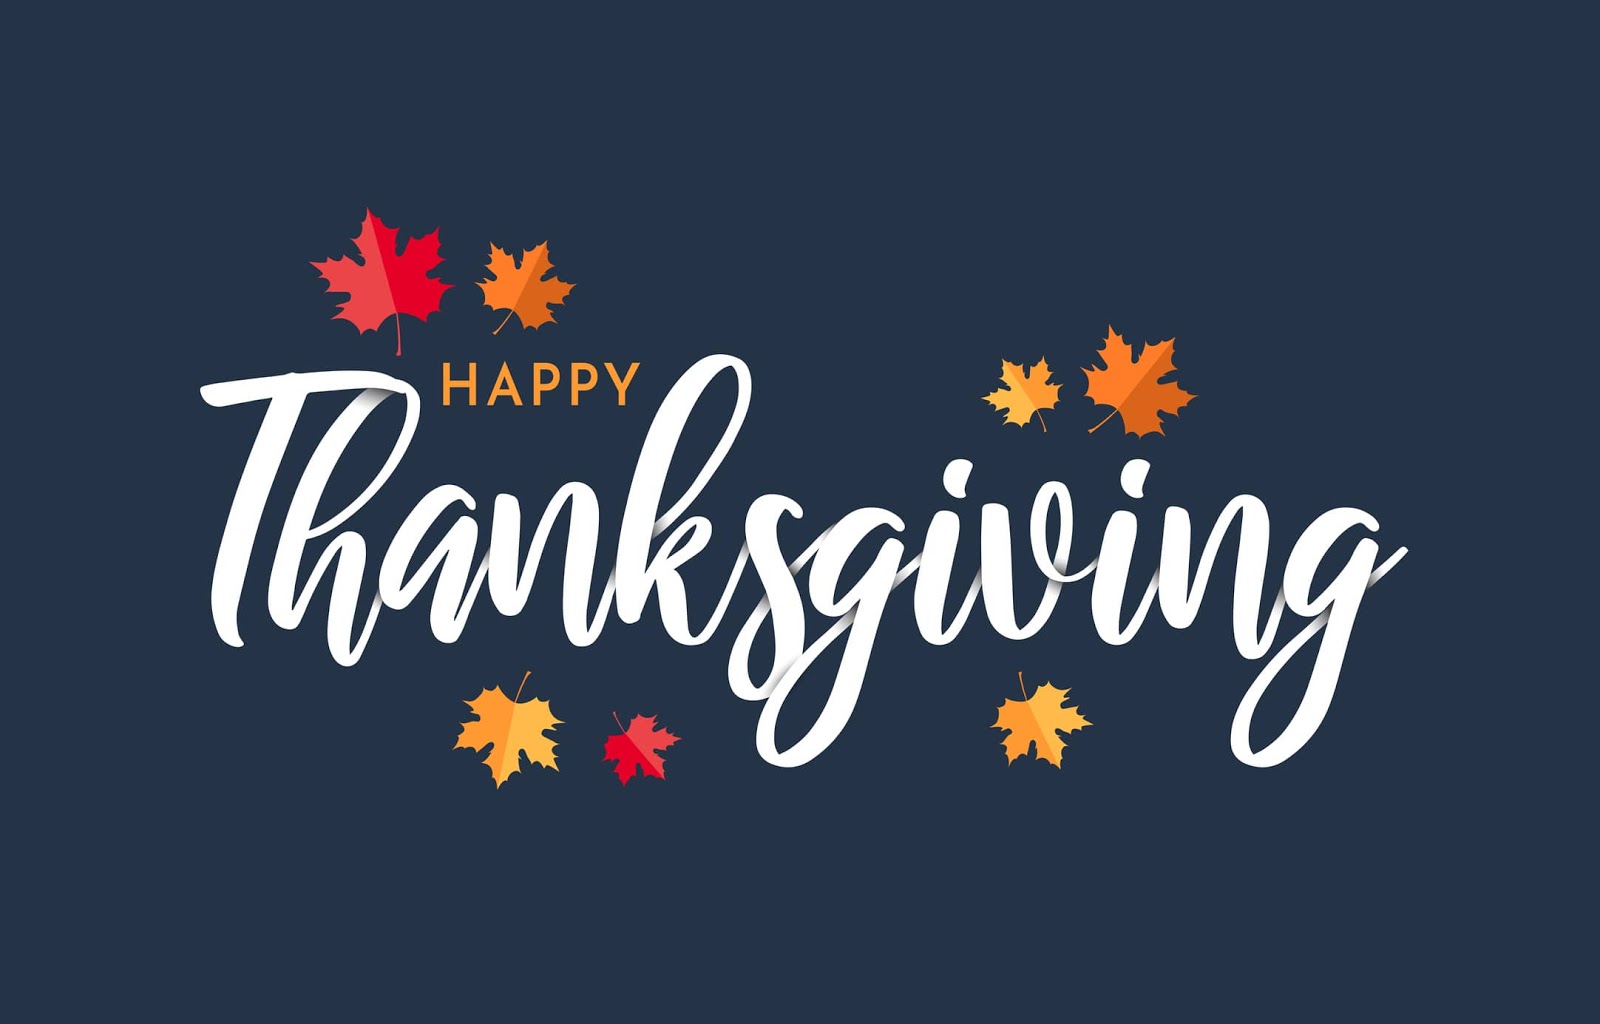 Happy Thanksgiving from GMG!